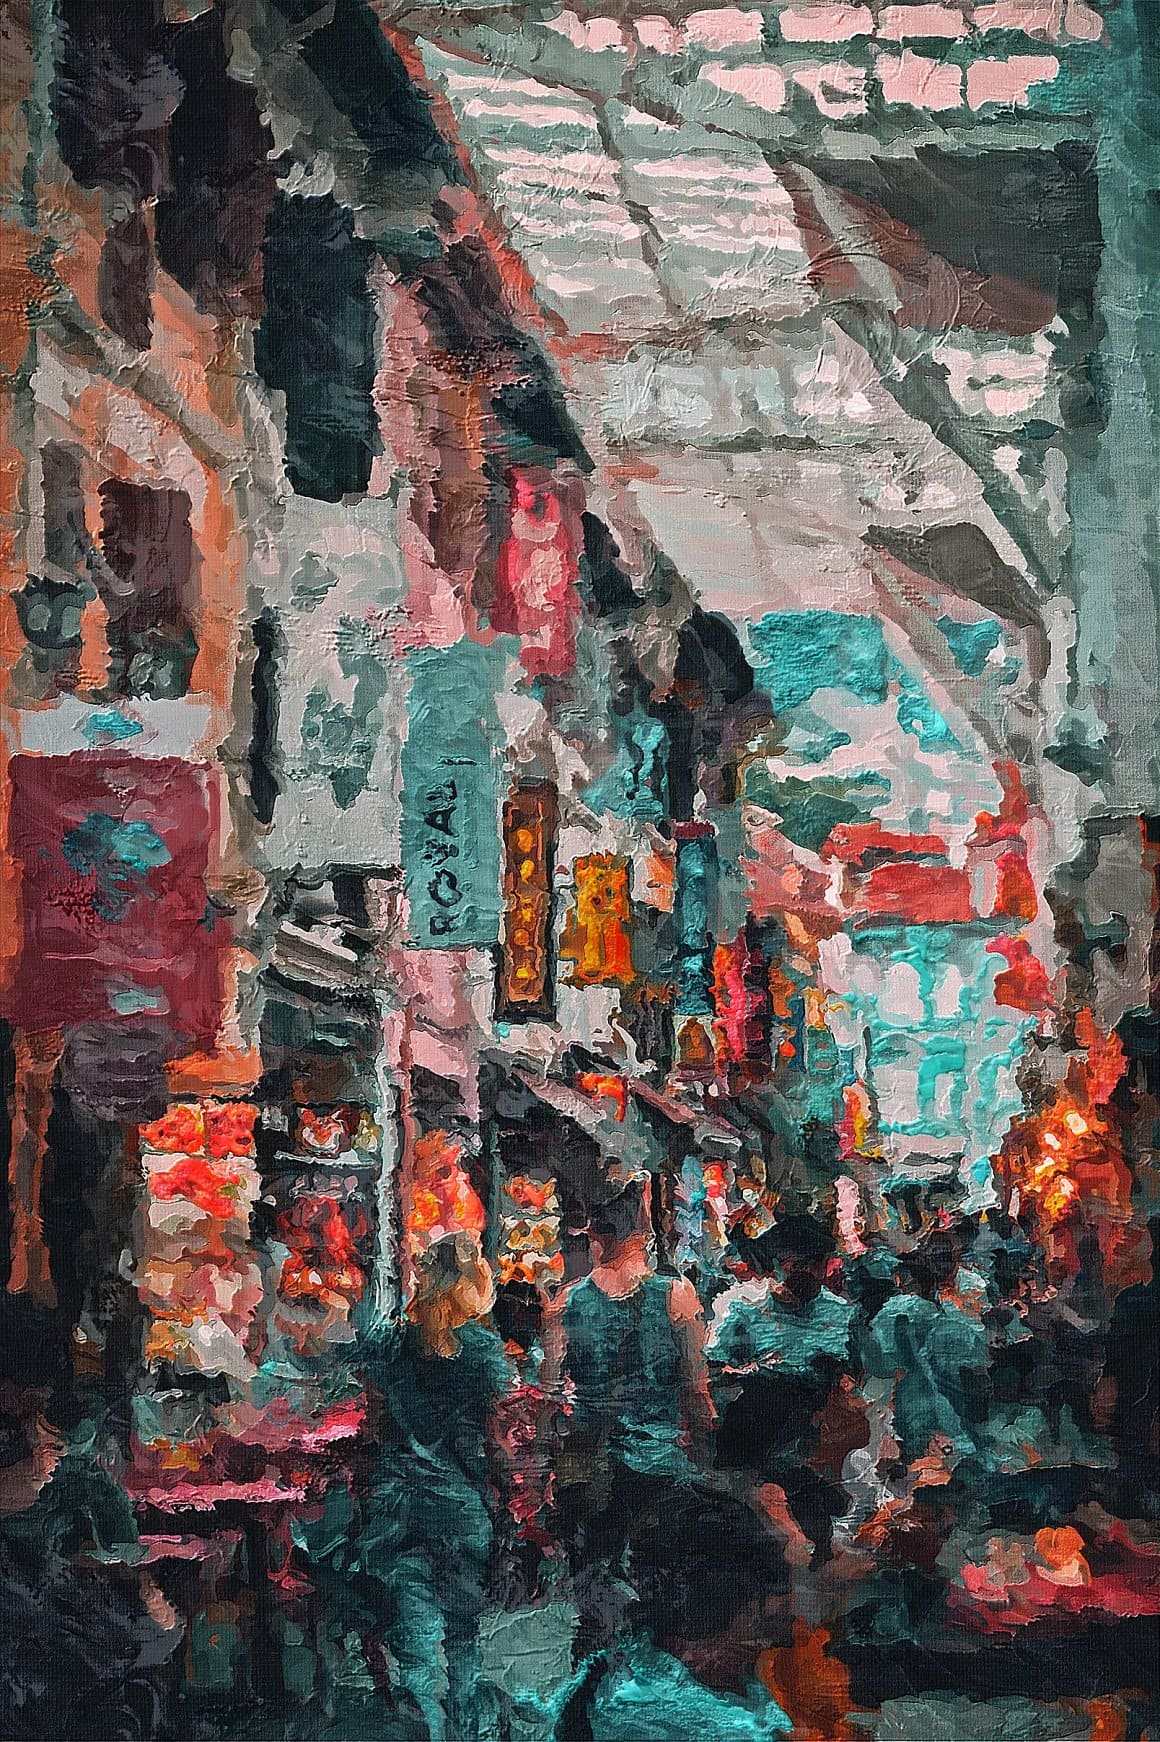 The image of a street where trade is actively taking place was processed in Palette Knife Photoshop Action.